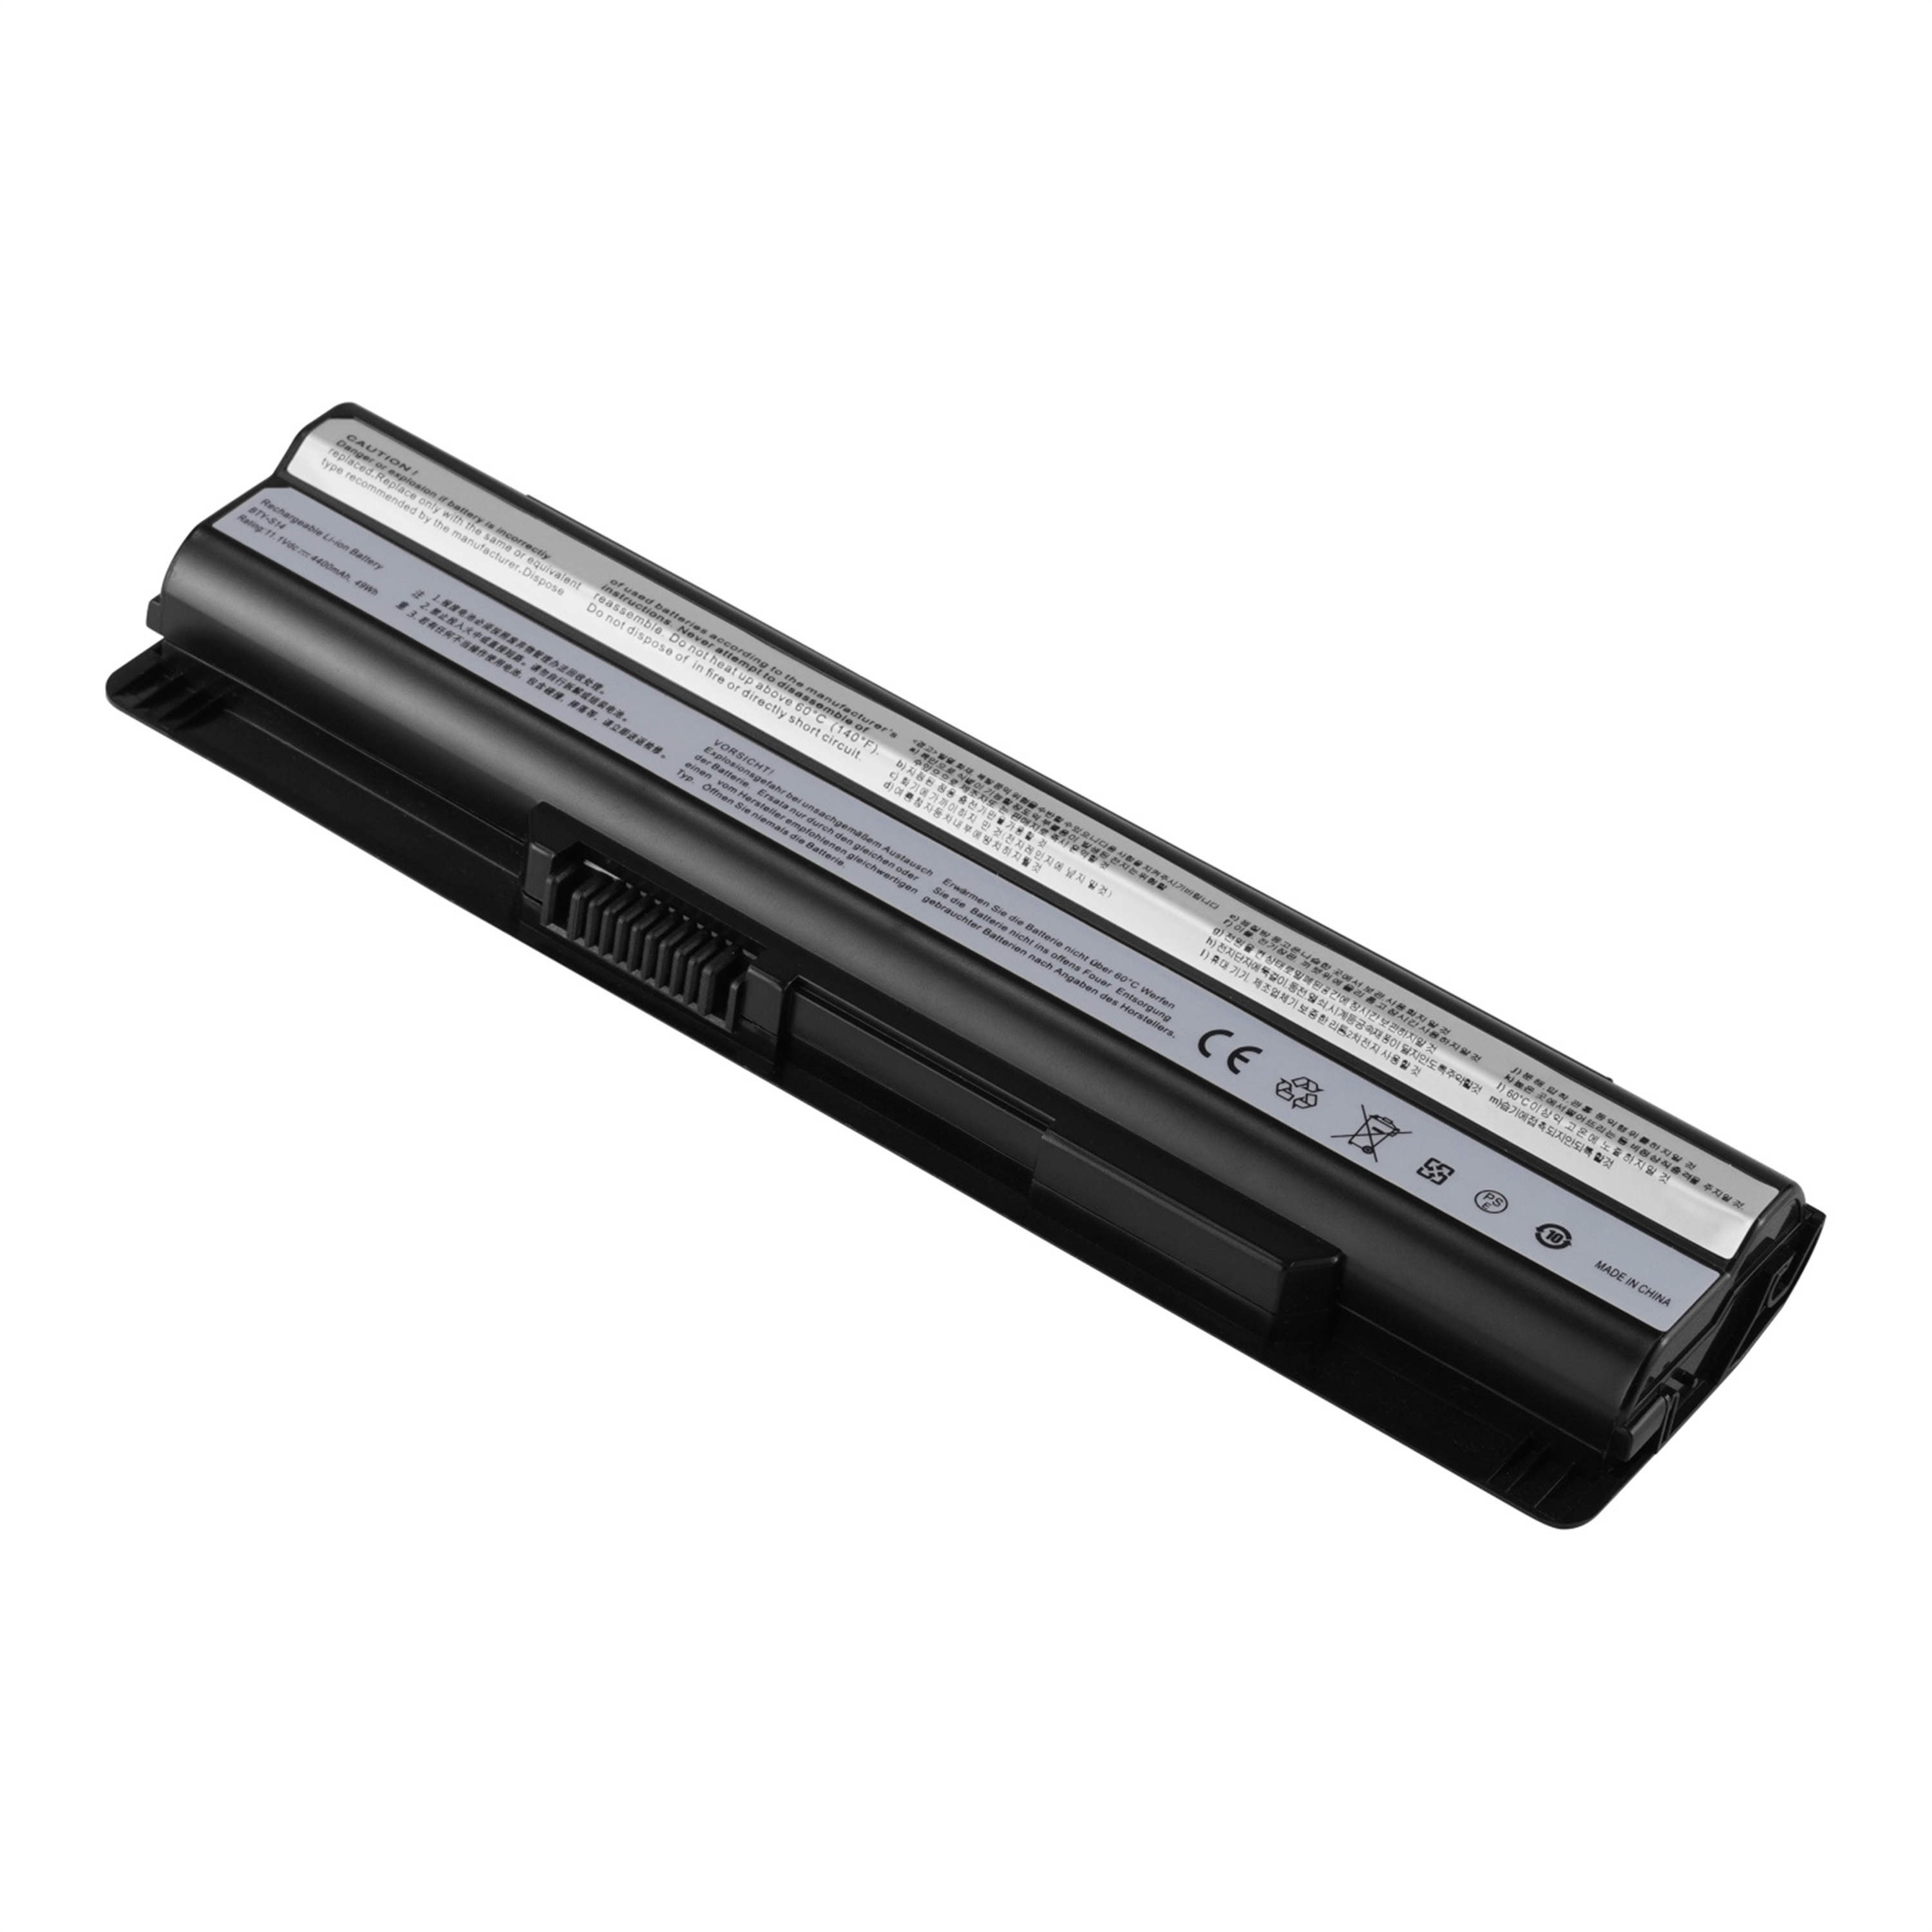 BTY-S14 rechargeable lithium ion Notebook battery Laptop batteryA31-D15 A32-D15 A41-D15 A42-D15 15.12V 2950mAh 44Wh